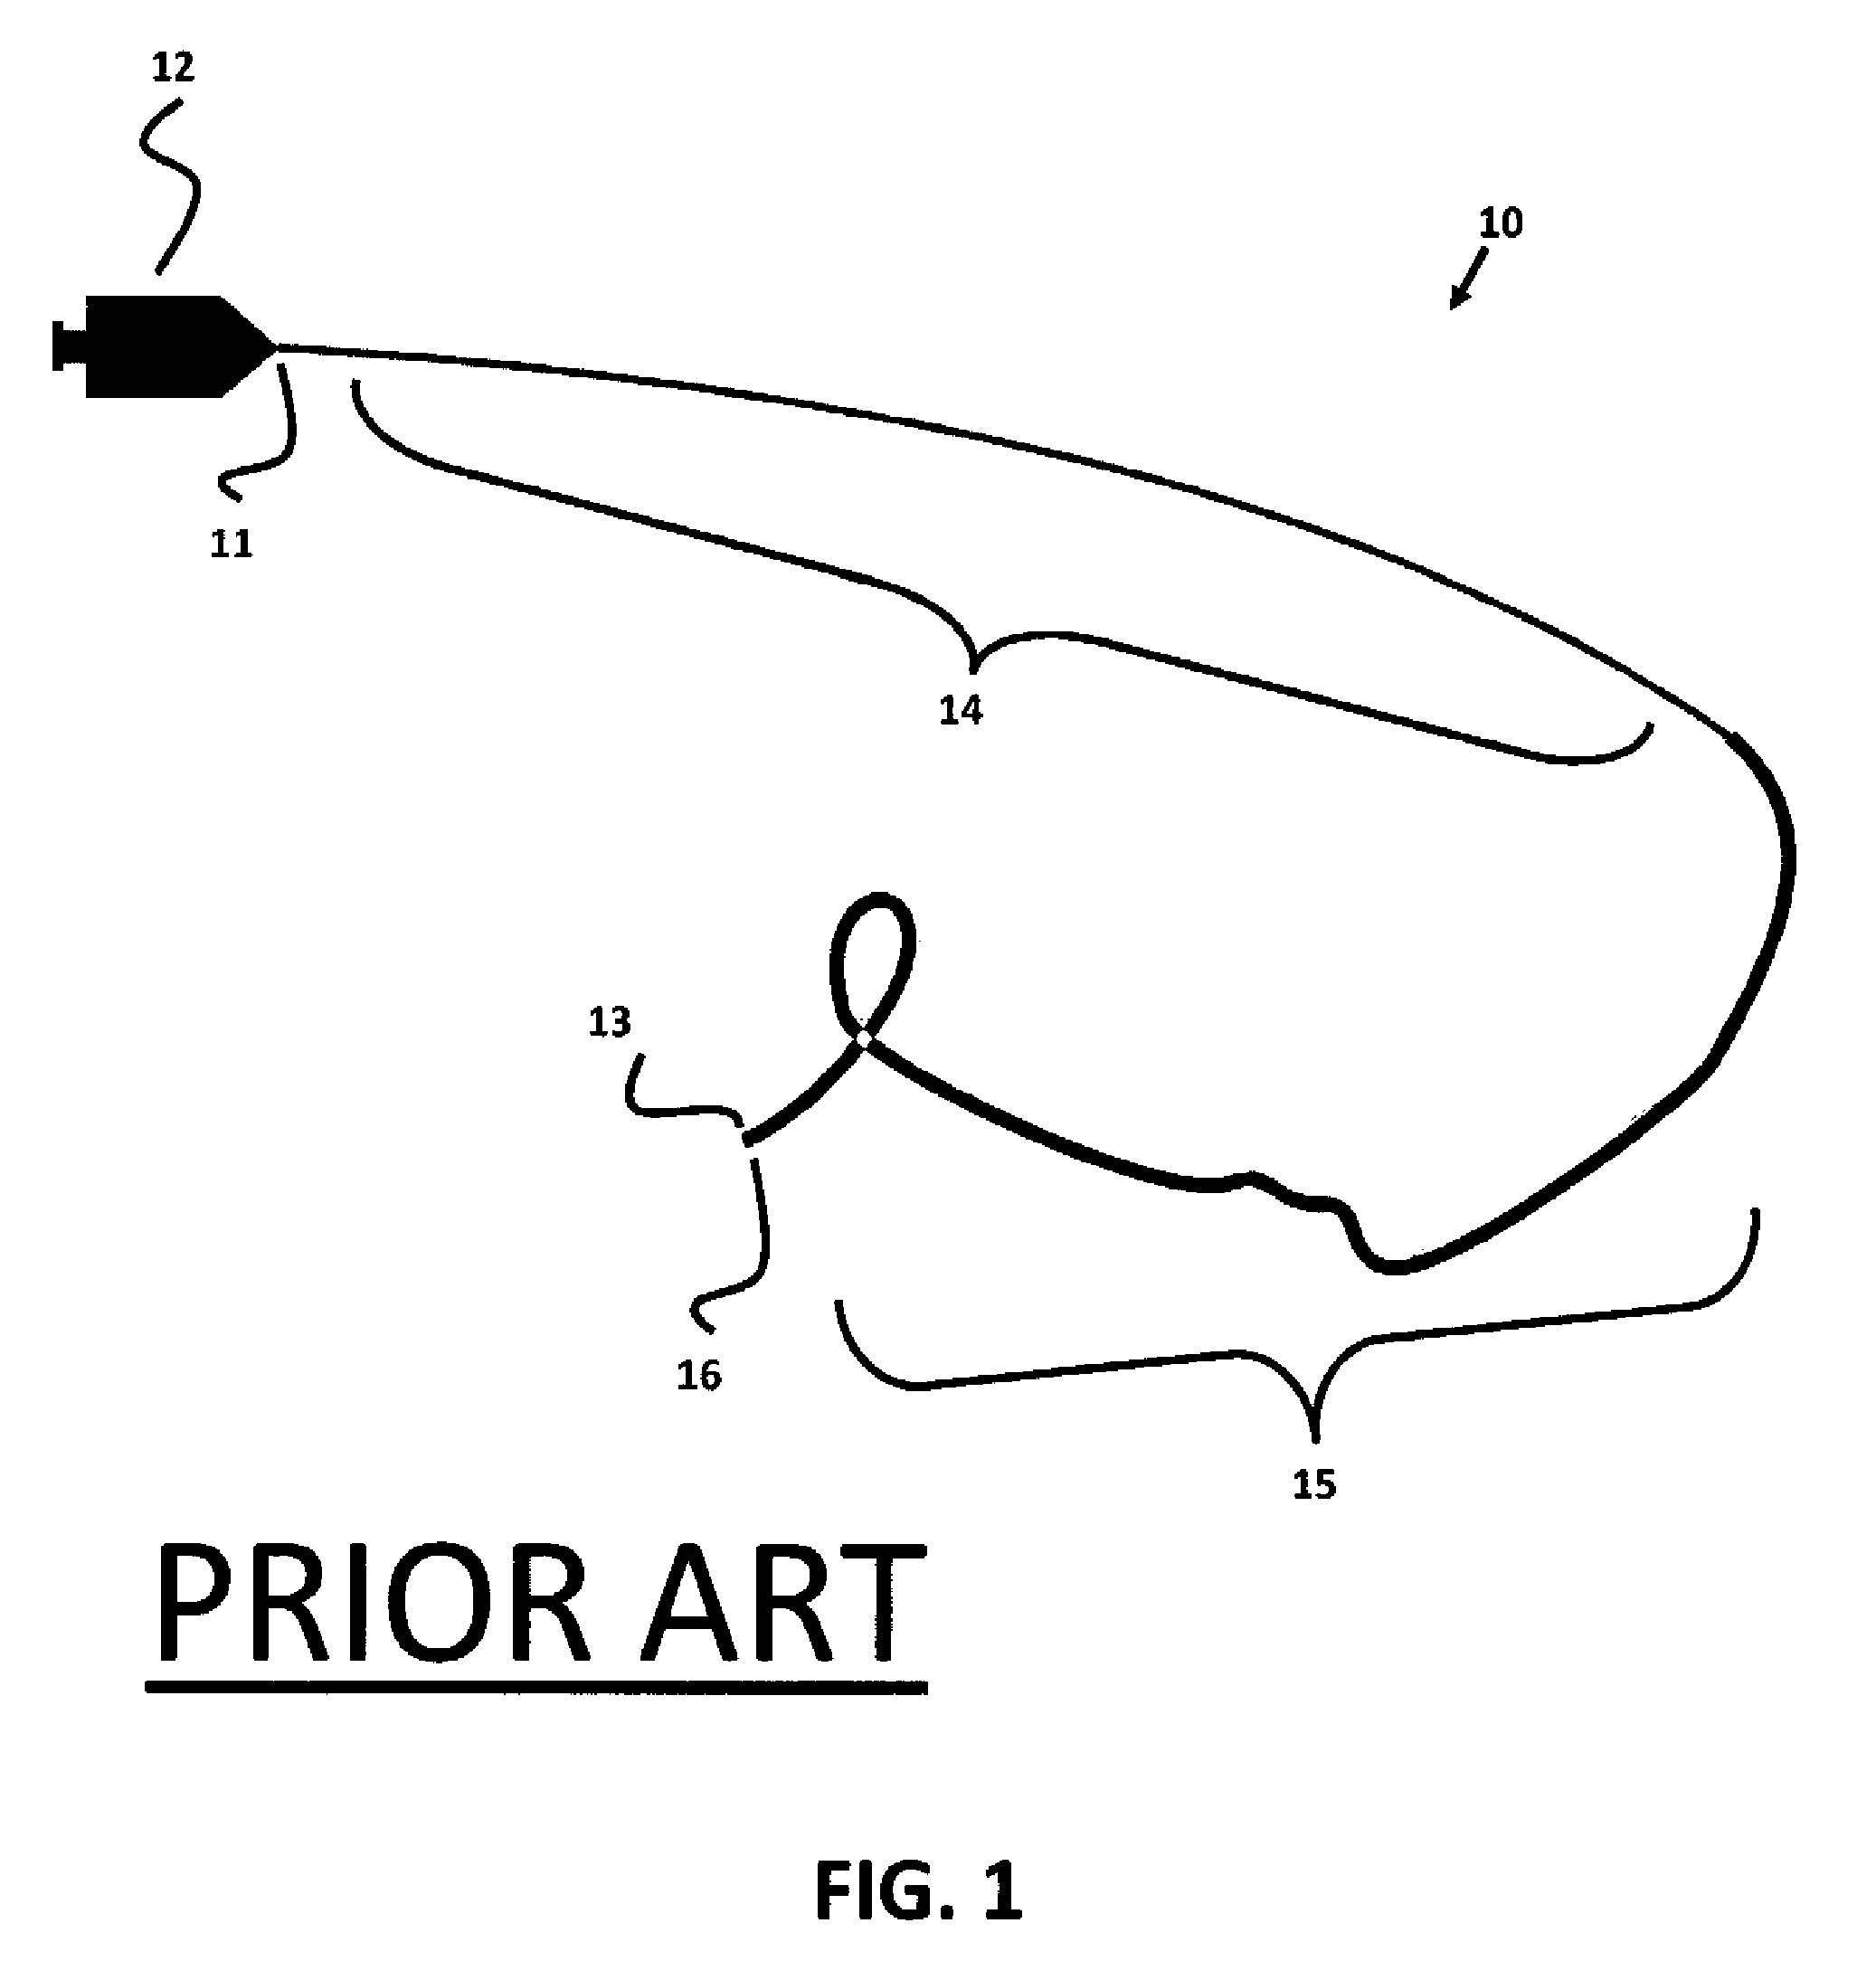 Micro-fabricated Guidewire Devices Having Varying Diameters